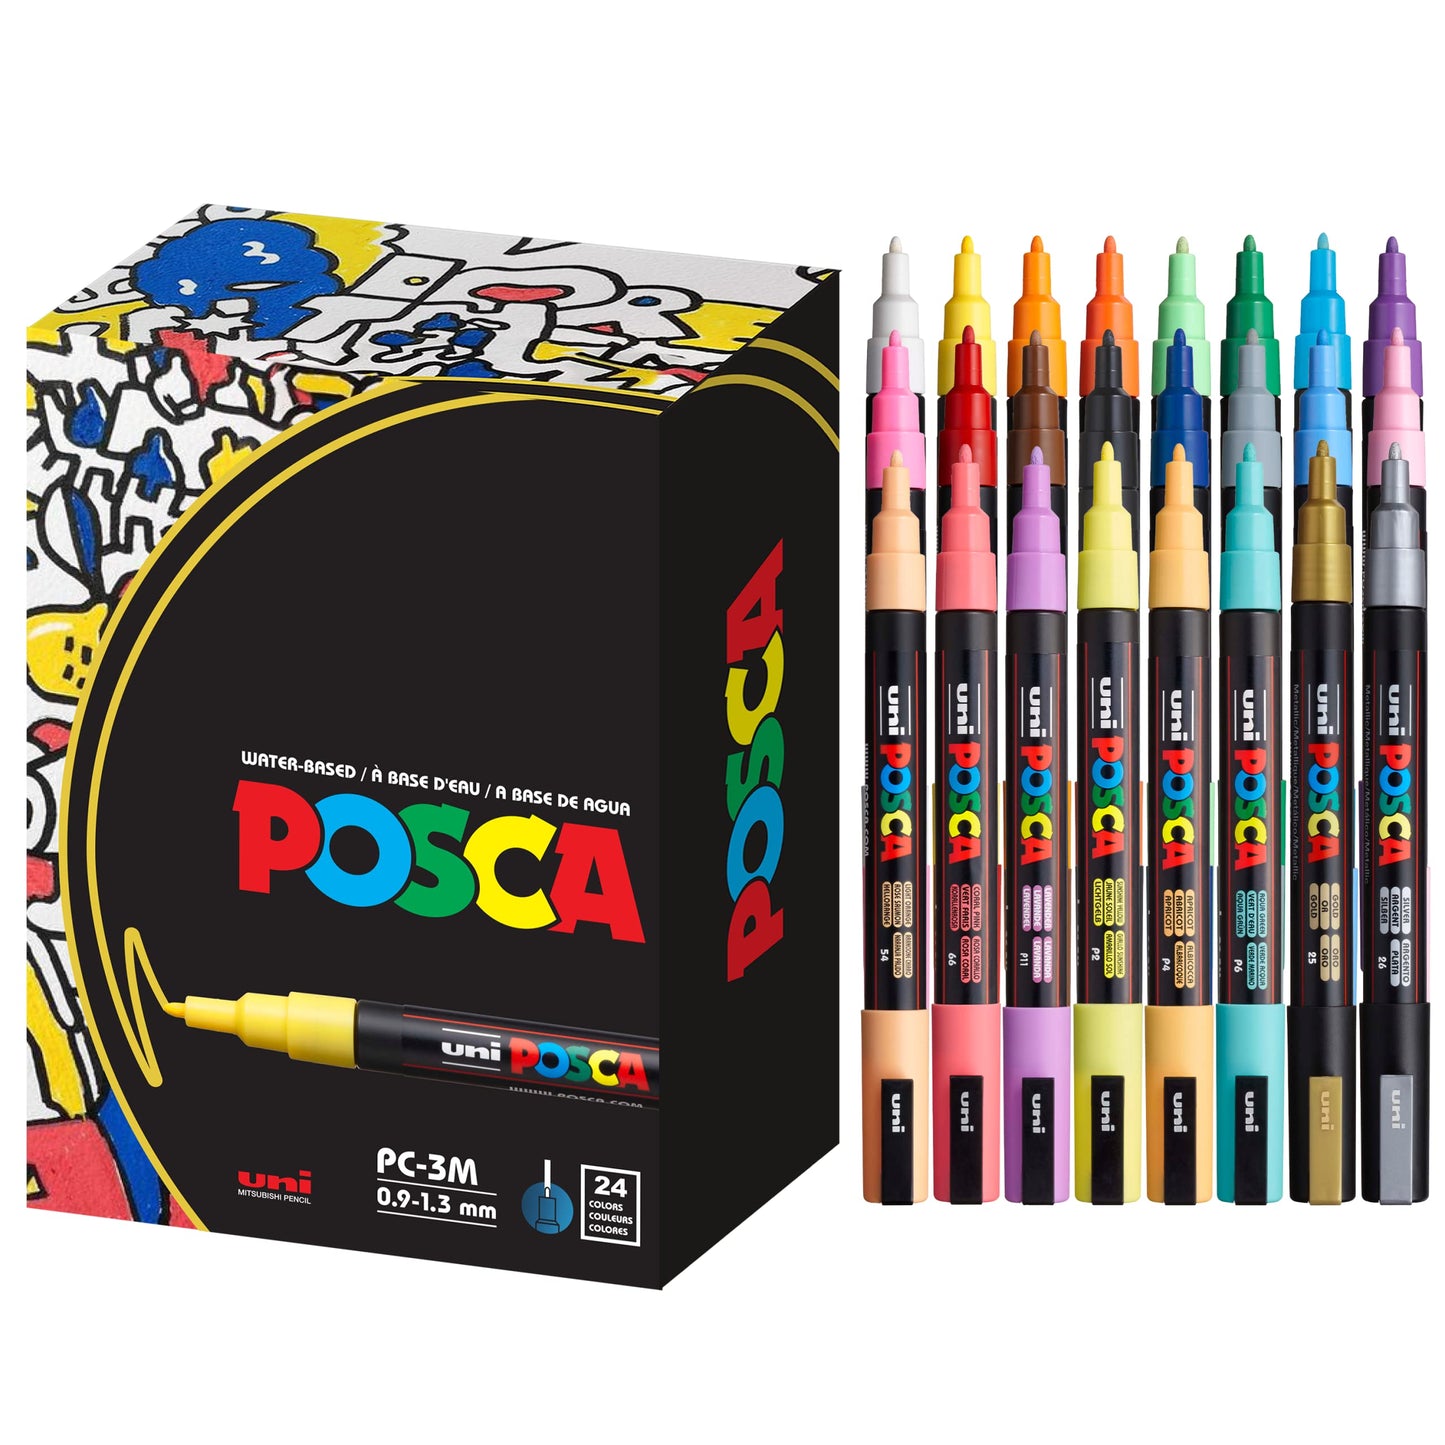 24 Posca Paint Markers, 3M Fine Posca Markers with Reversible Tips, Posca Marker Set of Acrylic Paint Pens | Posca Pens for Art Supplies, Fabric